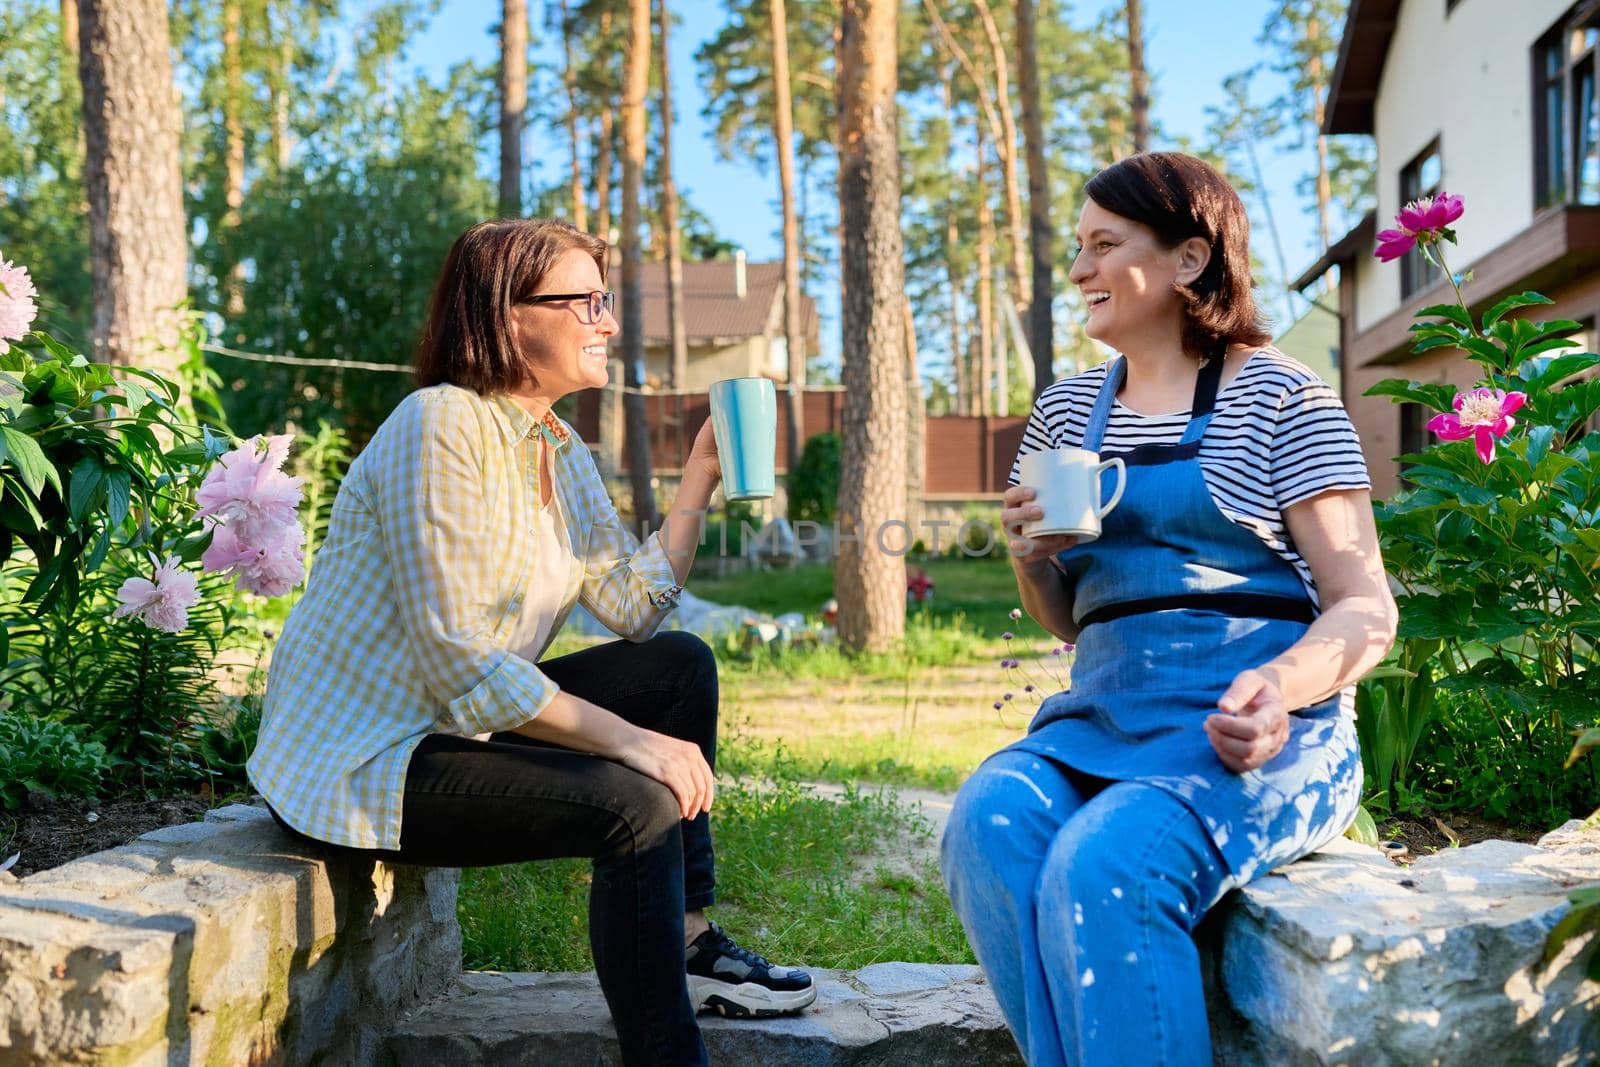 40s people, women, leisure, communication, friendship concept. Two laughing happy middle aged women sitting outdoors together in a spring garden, backyard with mugs of tea.